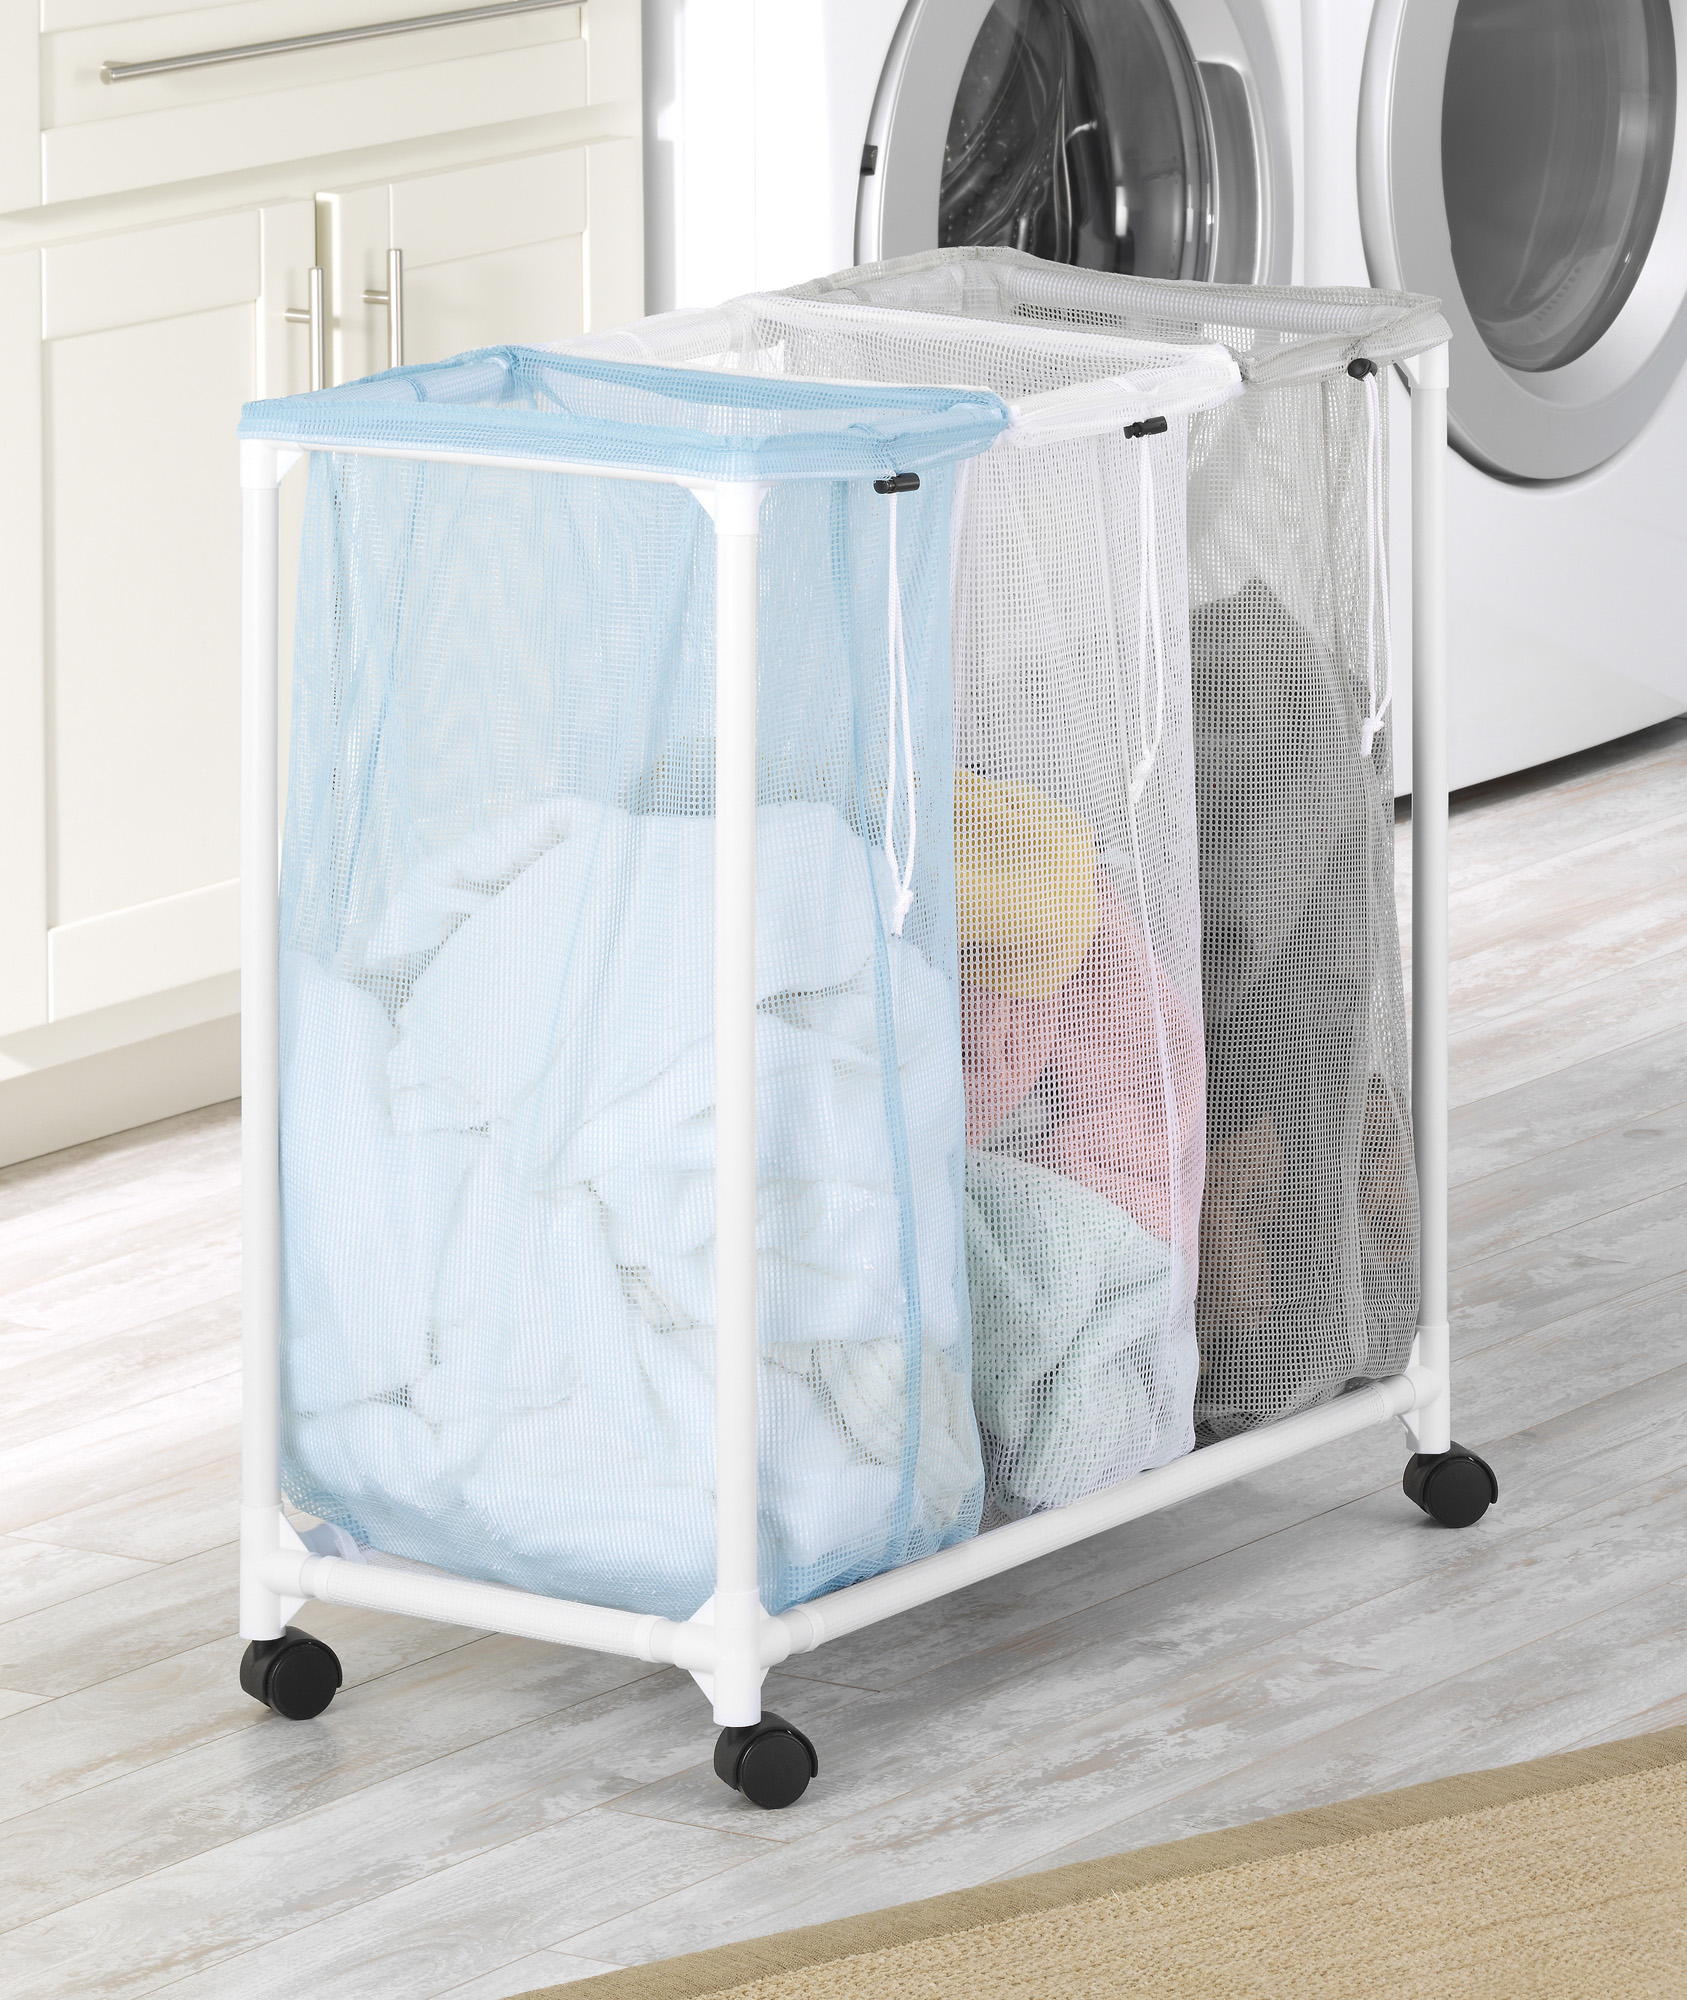 Whitmor Triple Mesh Bag Laundry Sorter, Clear and Blue - image 3 of 7